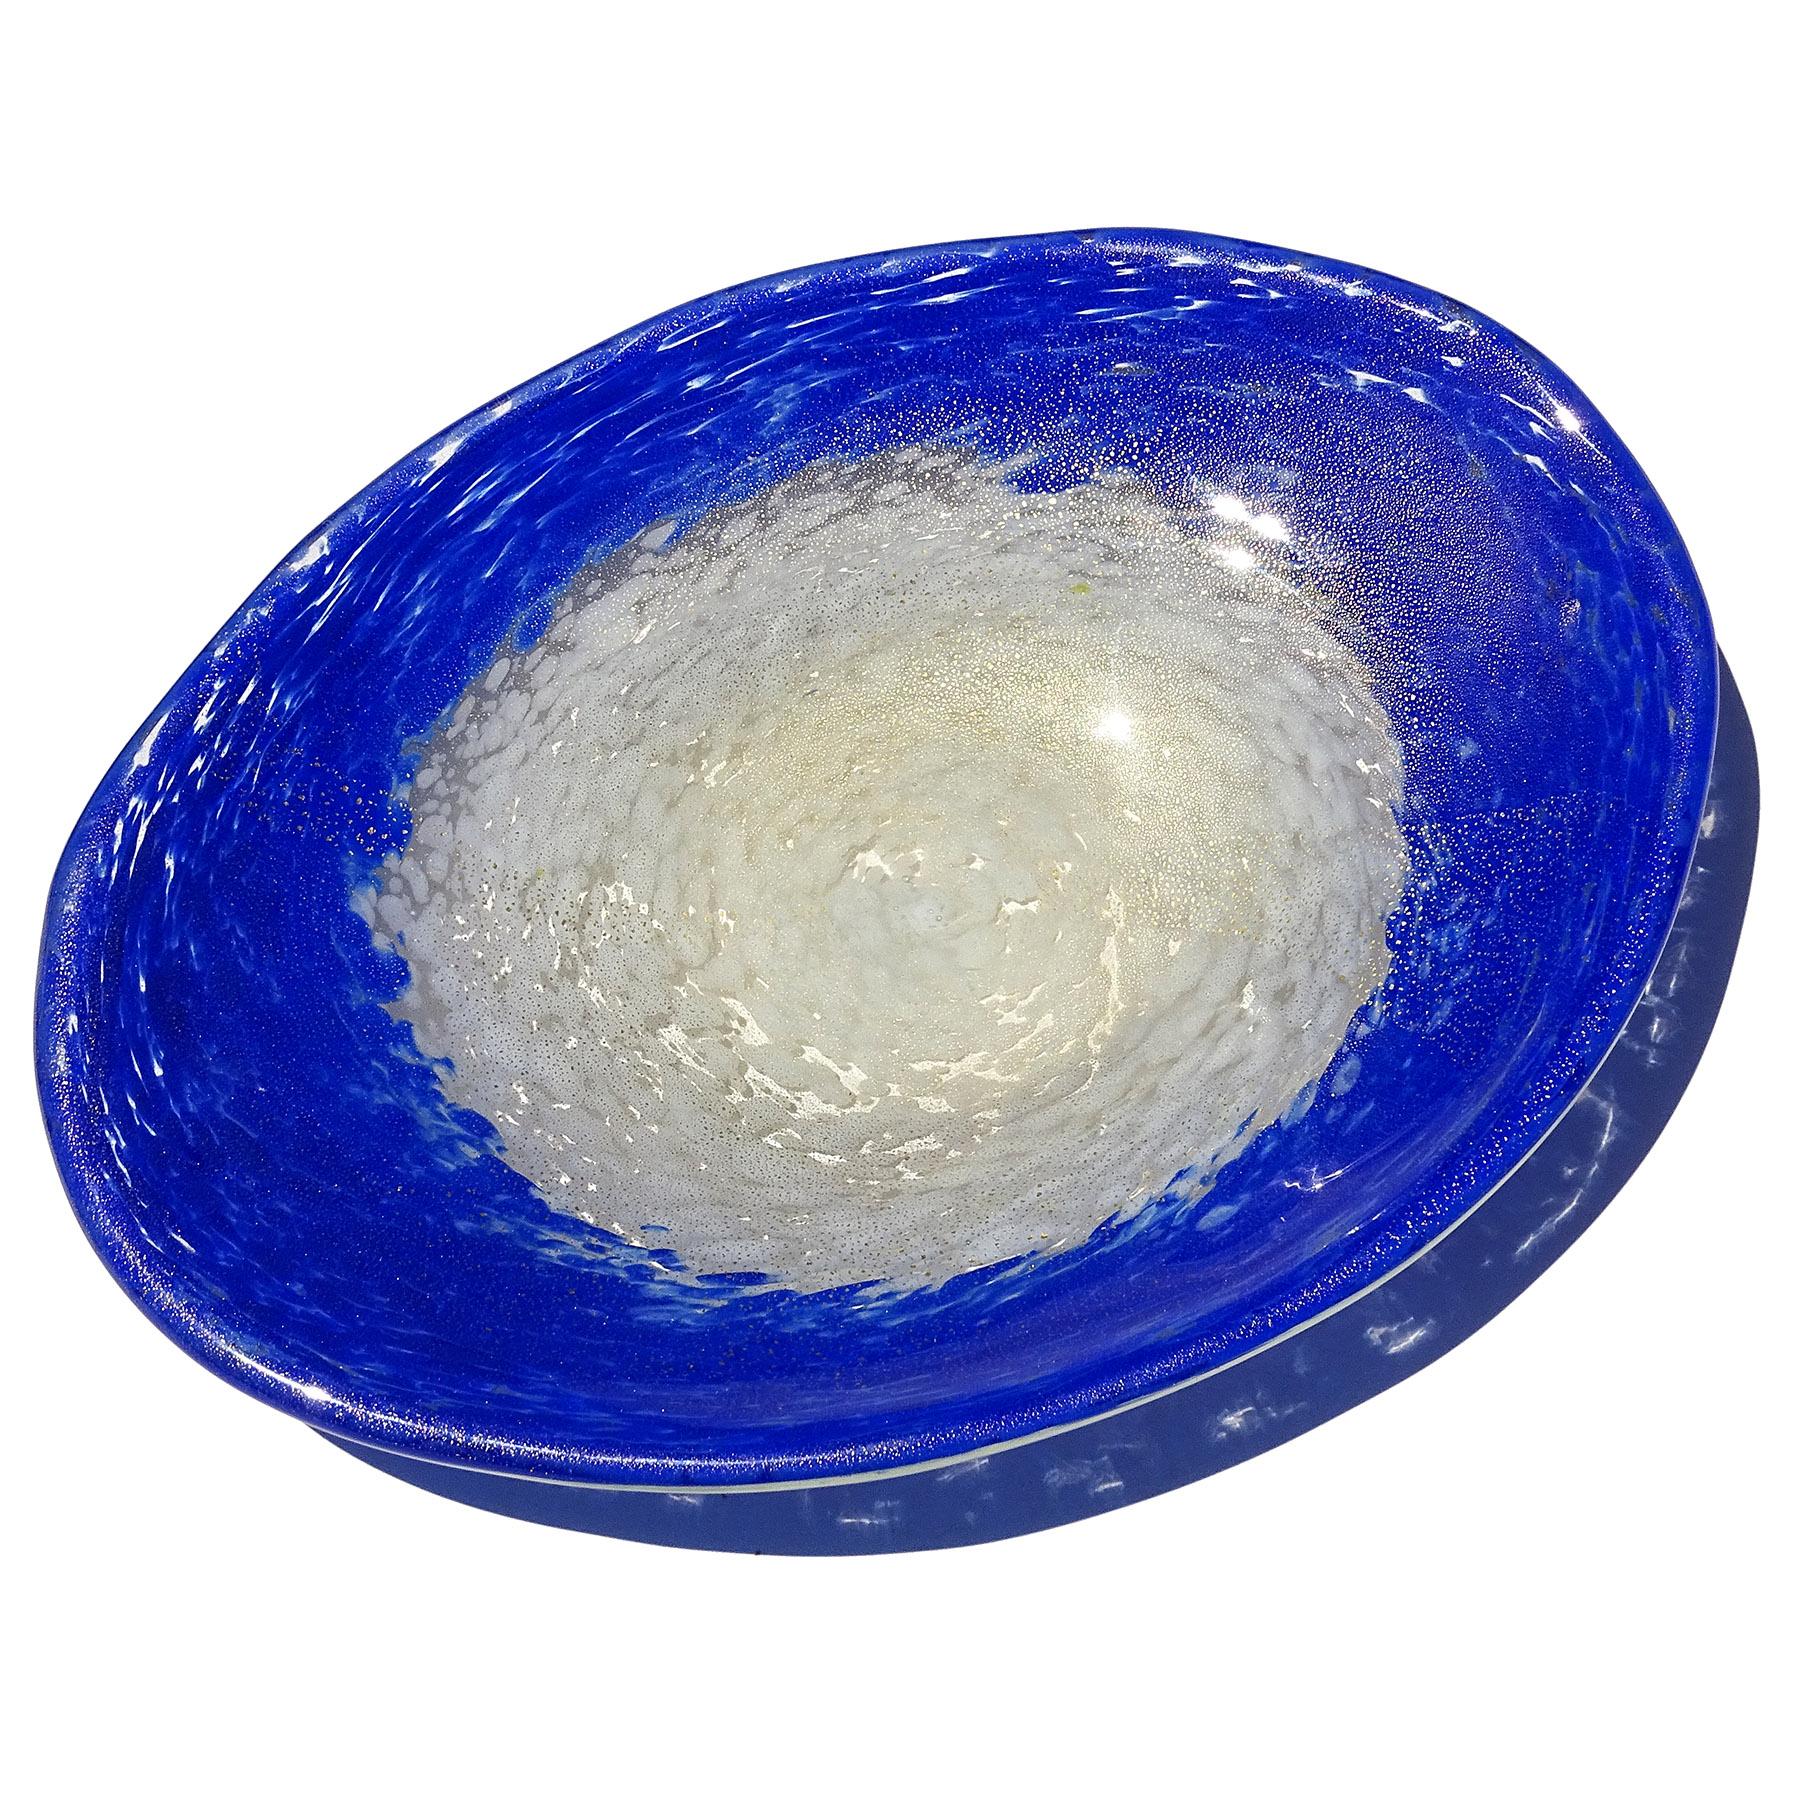 Fratelli Toso Murano White Sapphire Blue Gold Flecks Italian Art Glass Oval Bowl In Good Condition For Sale In Kissimmee, FL